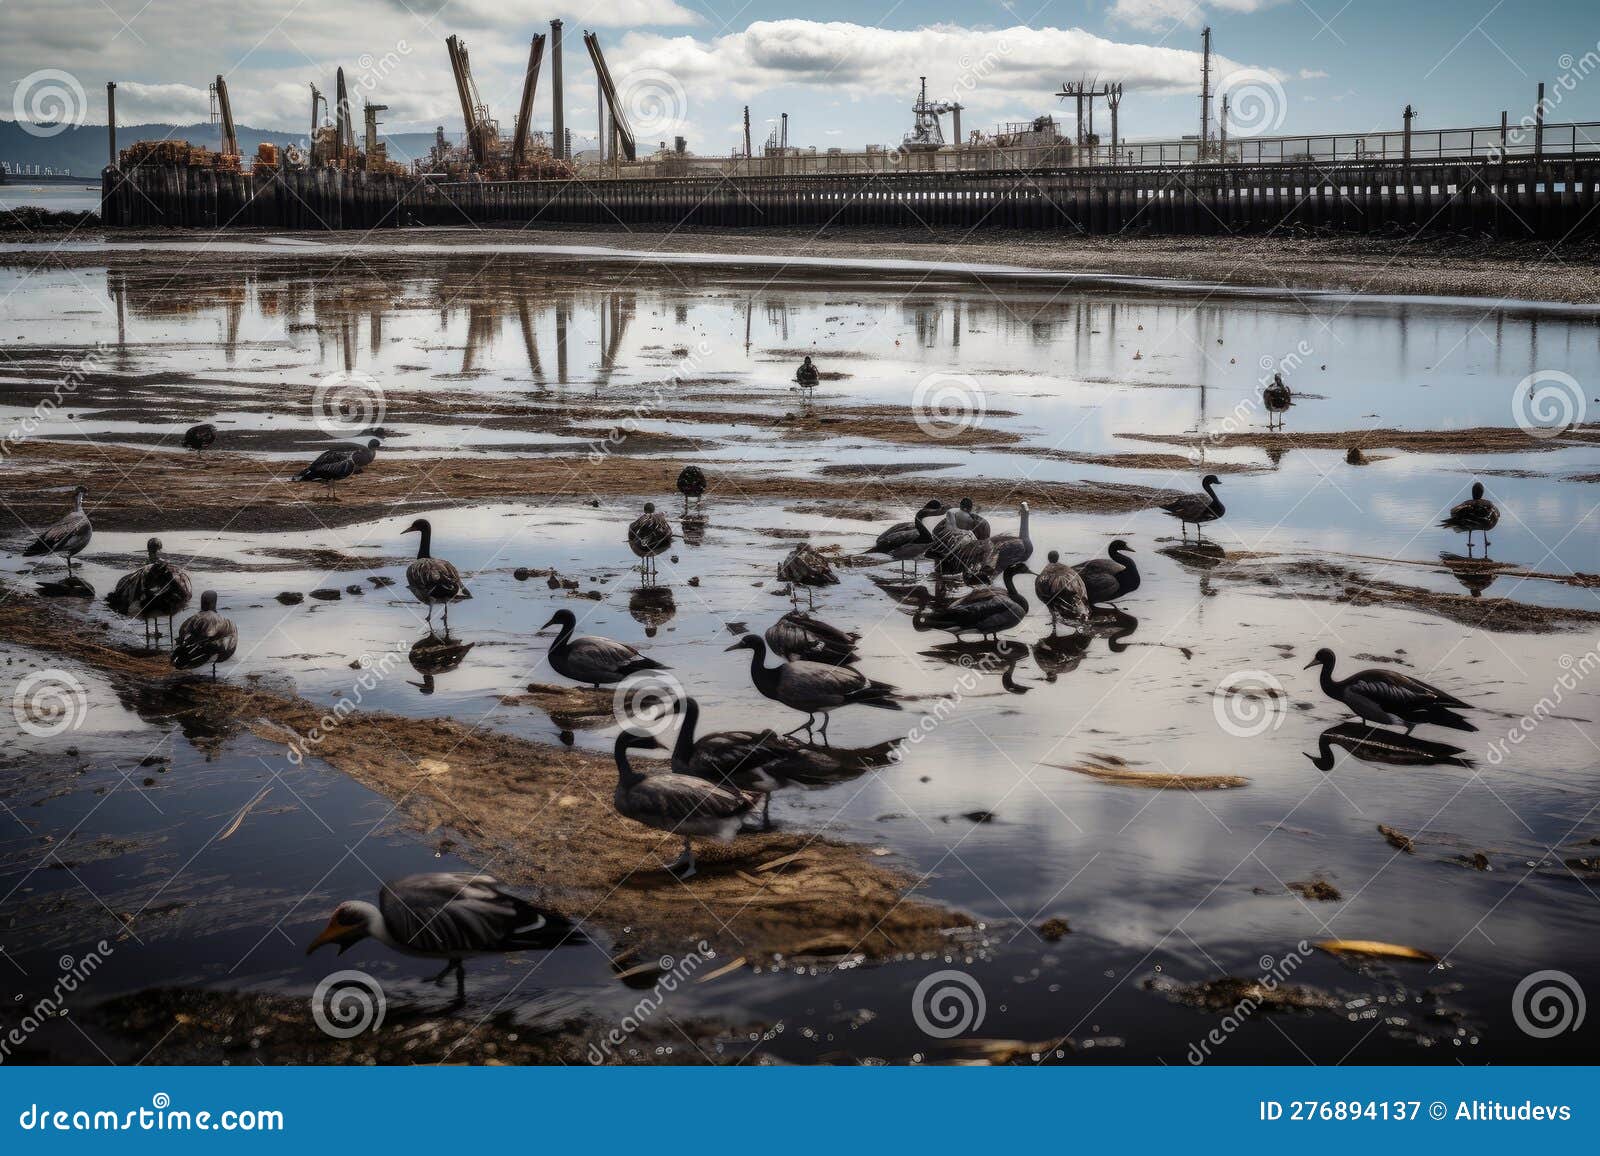 oil spill in the bay, with birds and fish swimming among the slicks